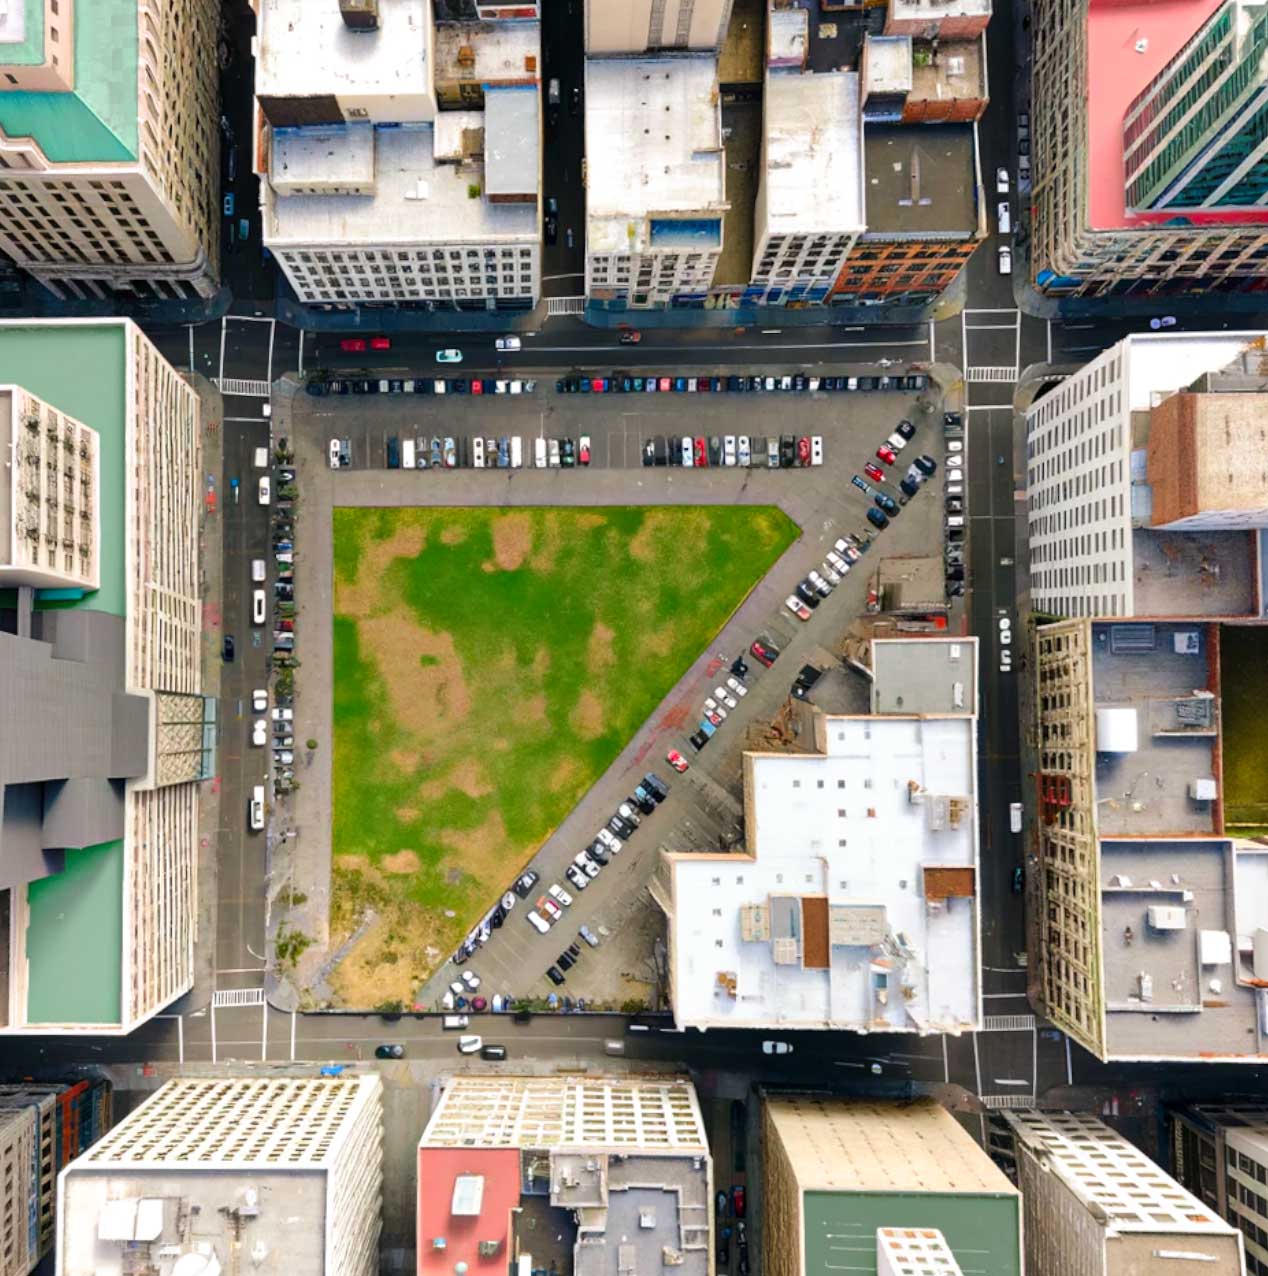 Aerial view of an urban city block with a green triangular park in the center, surrounded by tall buildings. Cars are parked along the perimeter of the park and on the surrounding streets. The buildings cast shadows, and some roads have visible crosswalks.